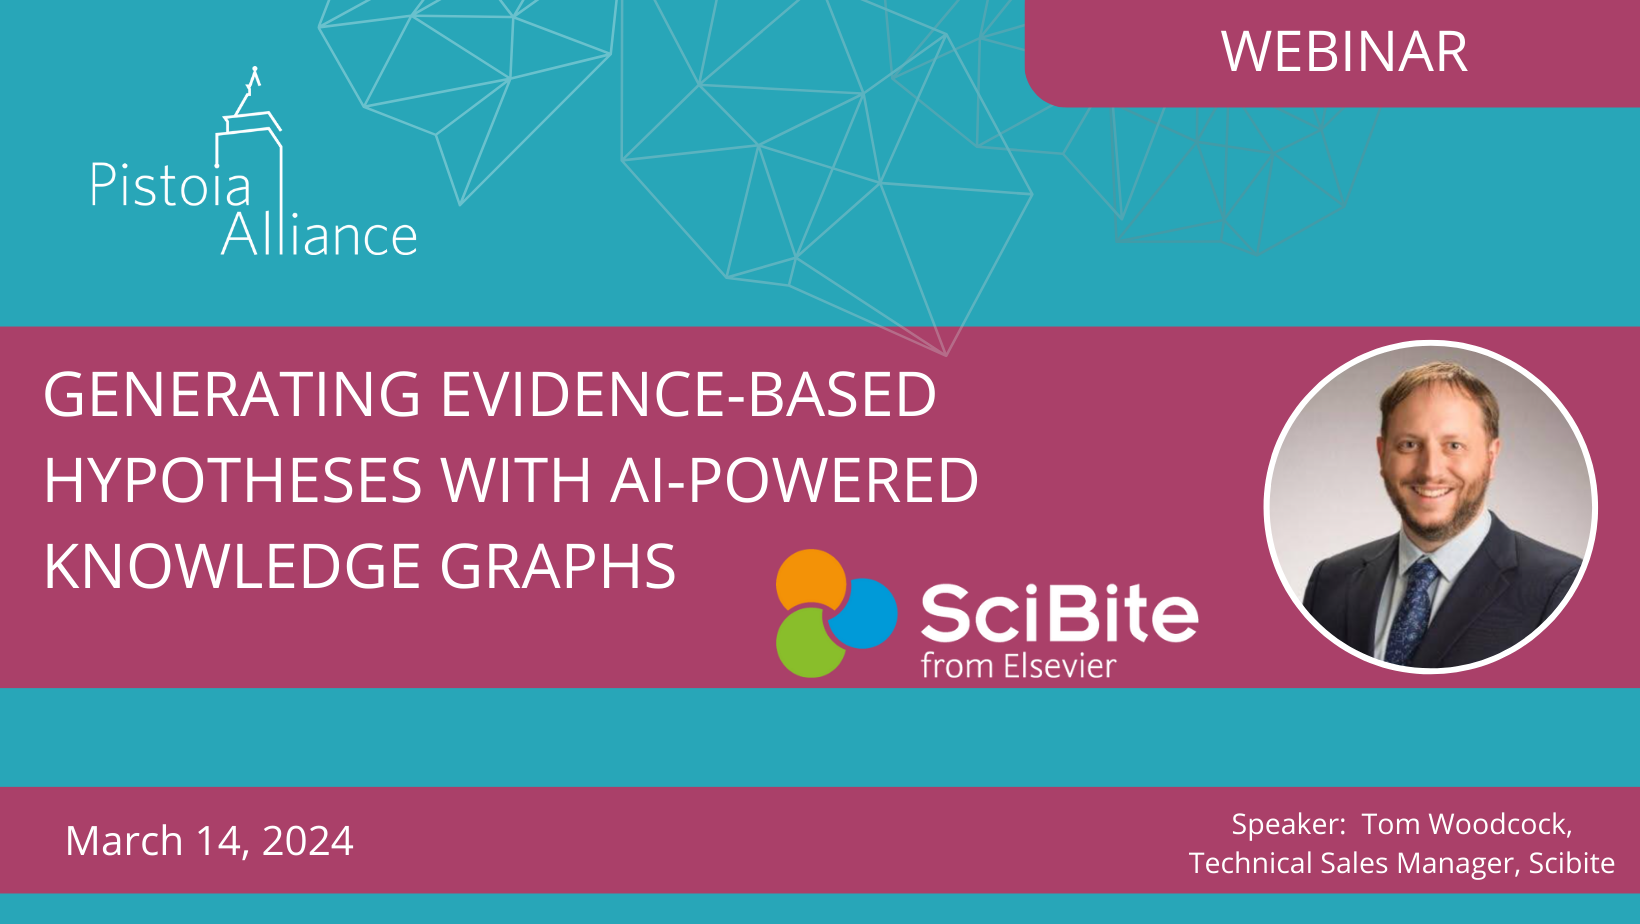 Generating Evidence-Based Hypotheses with AI-powered Knowledge Graphs